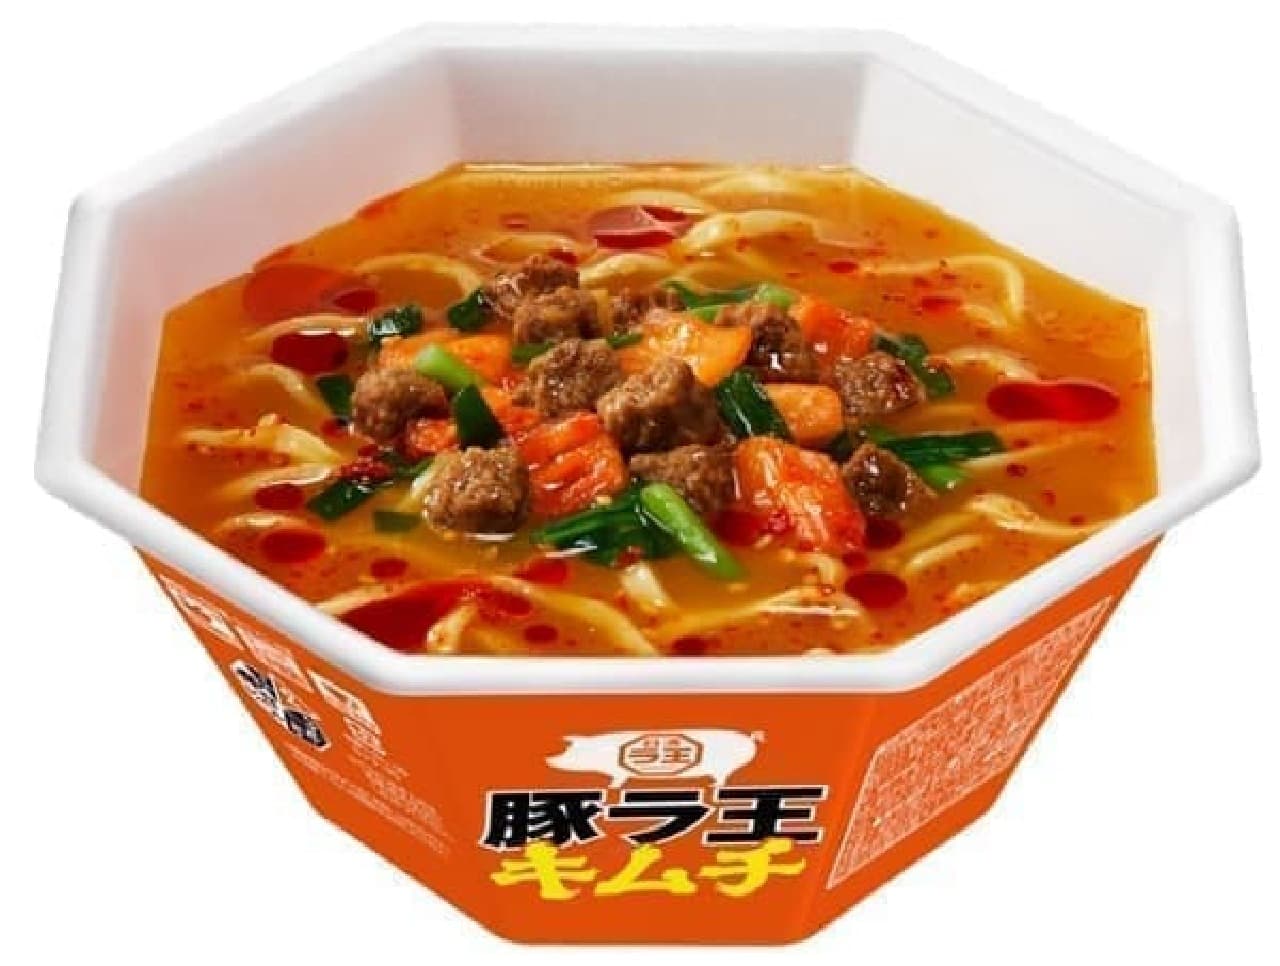 "Nissin Pork Lao Kimchi" with full stamina and delicious food